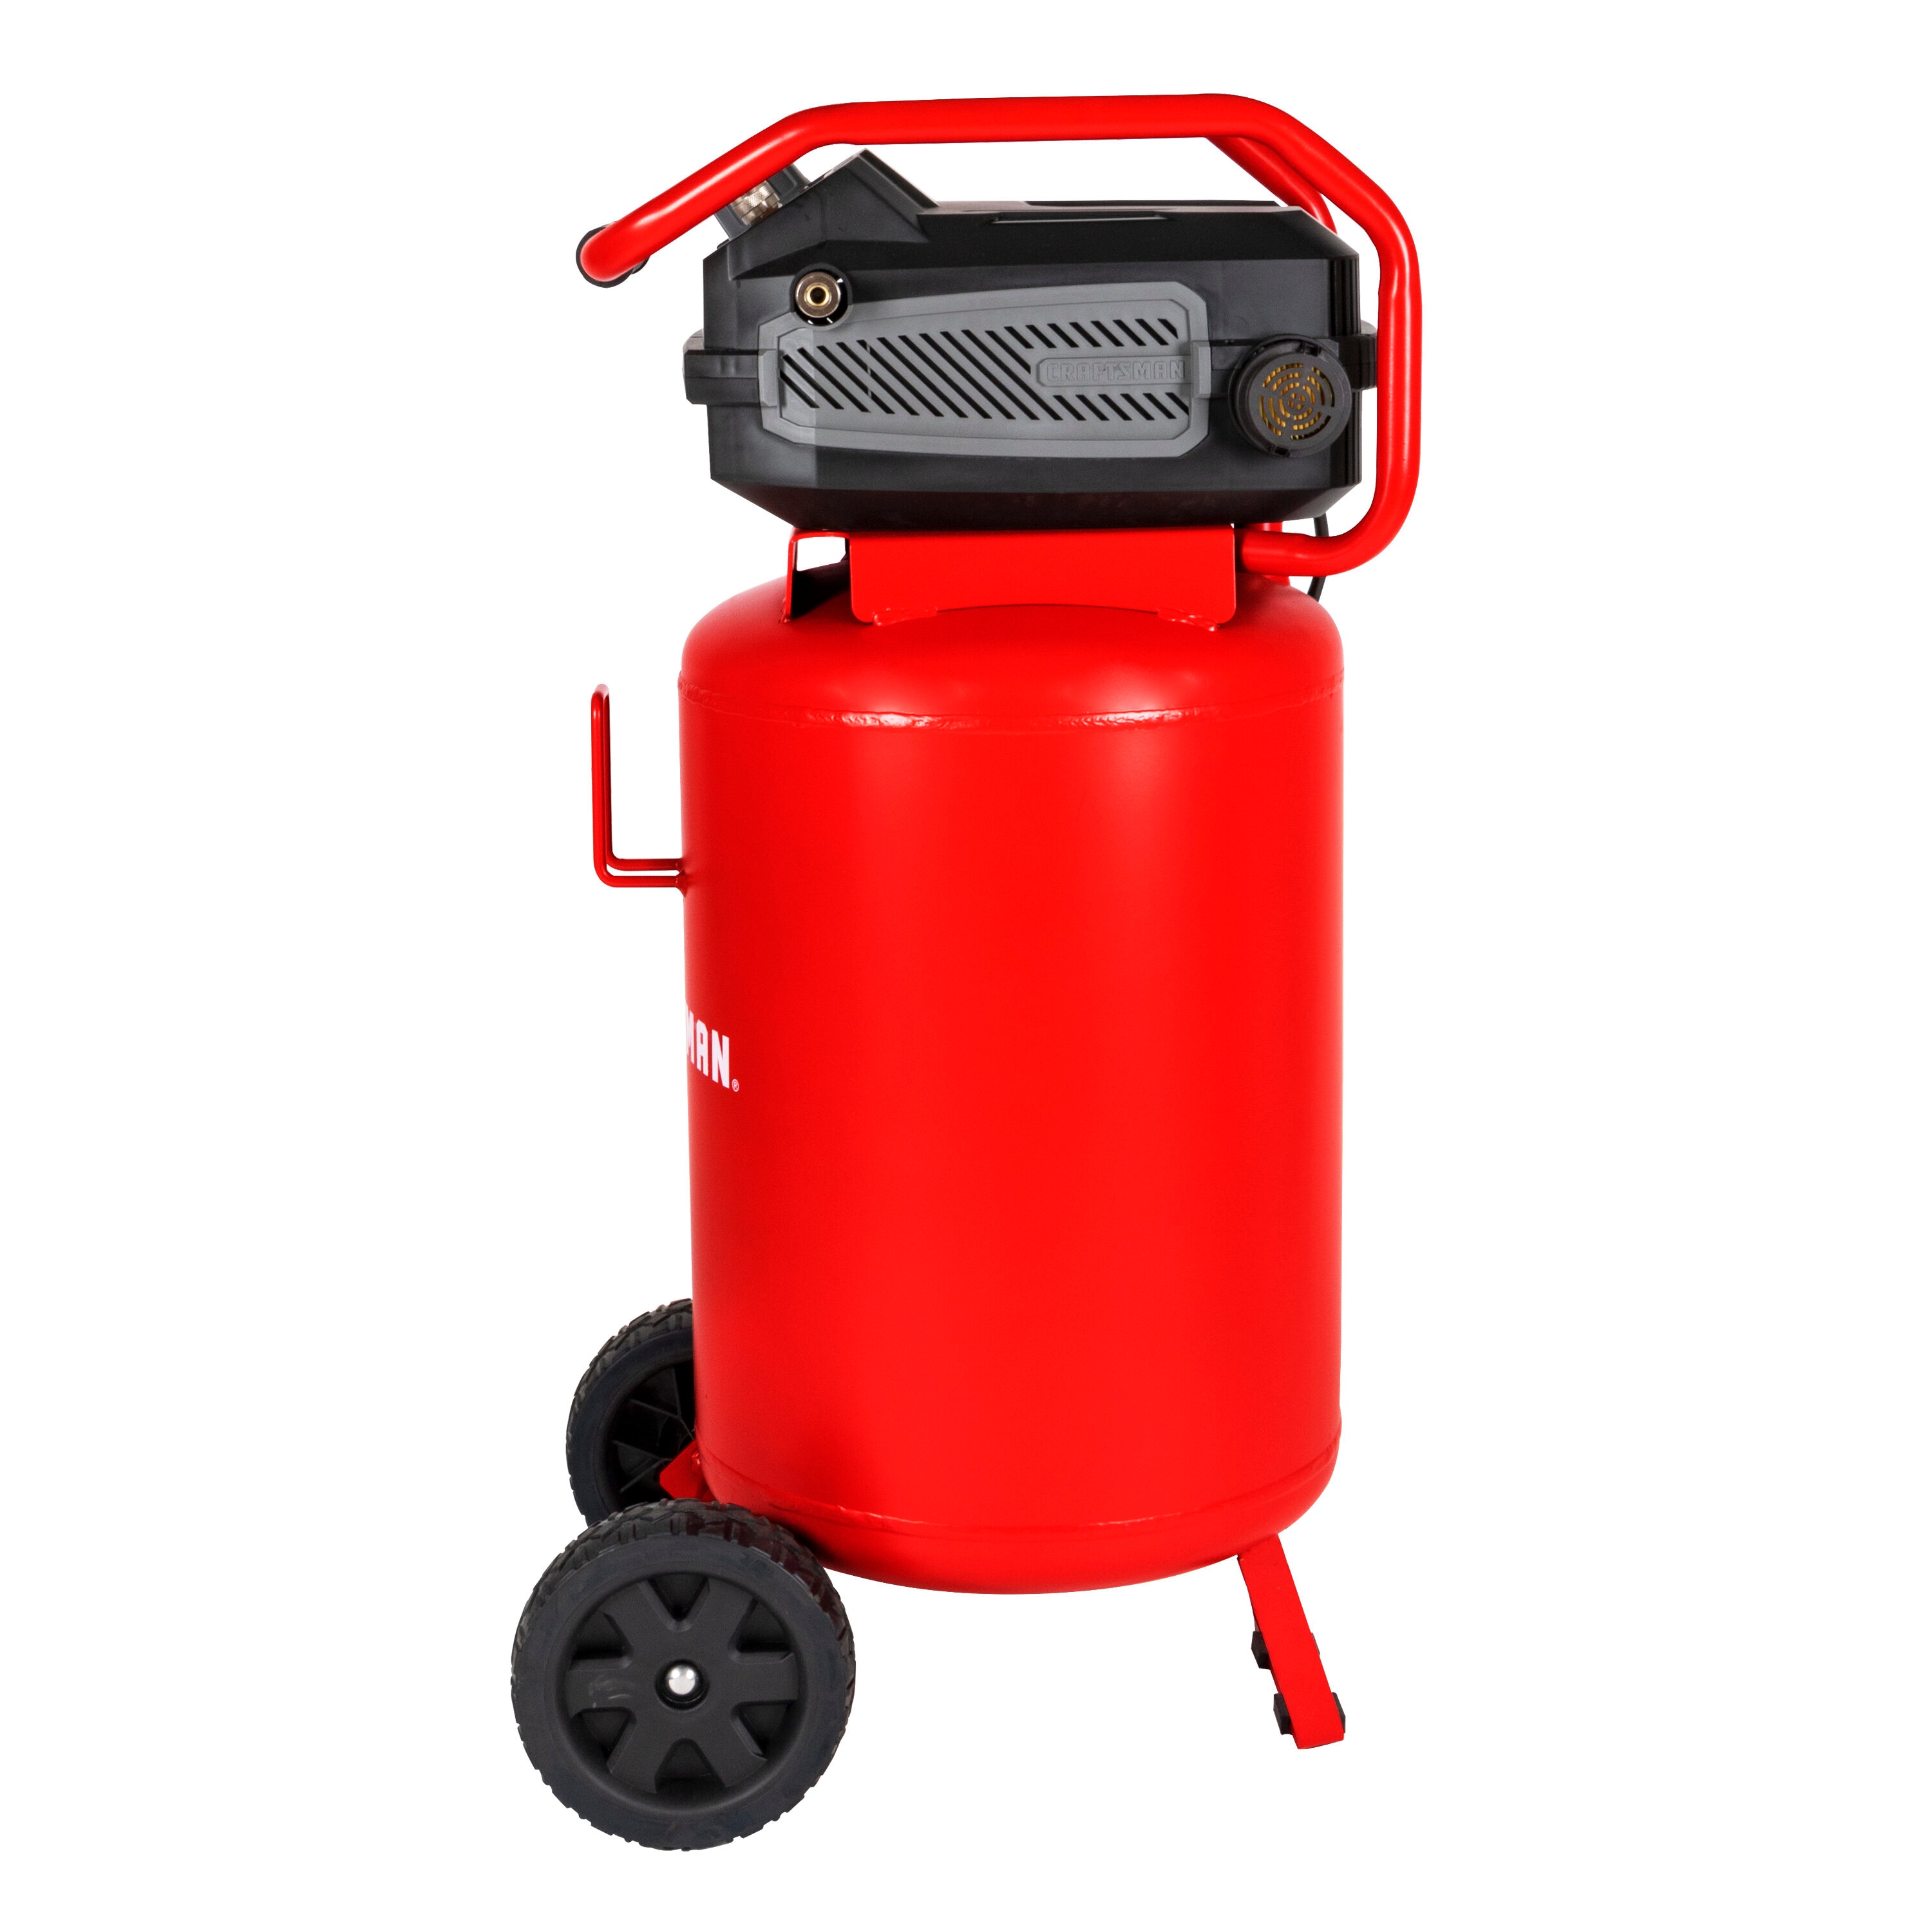 CRAFTSMAN 20-Gallons Portable 175 Psi Vertical Air Compressor in